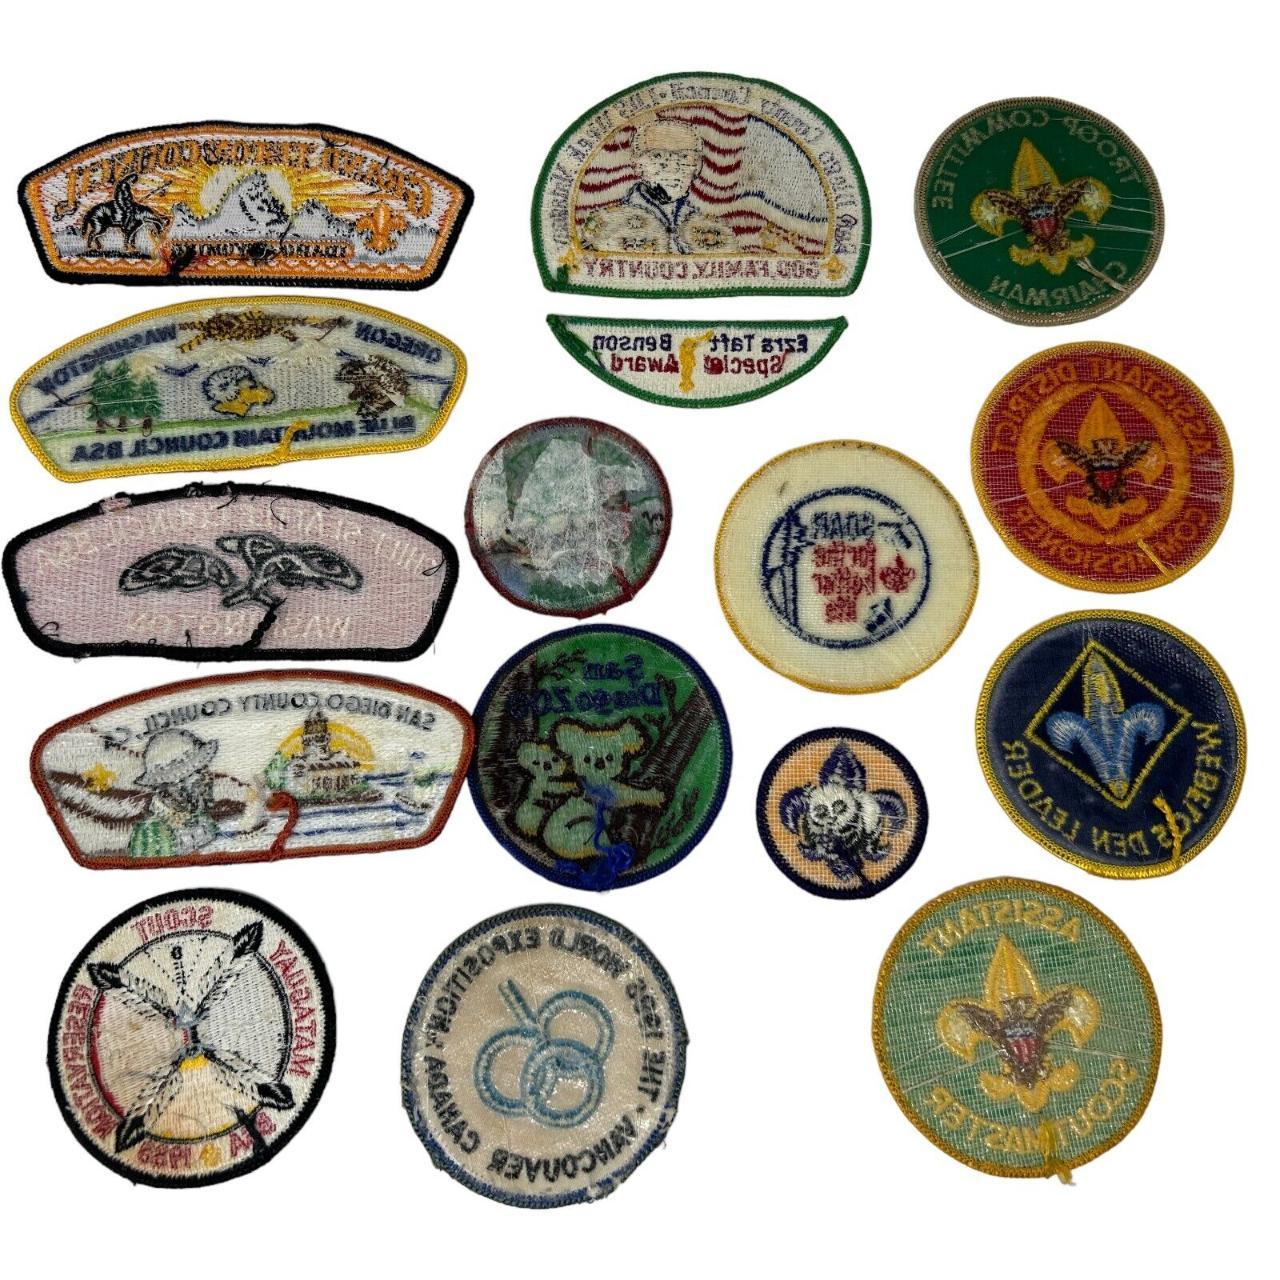 Sold at Auction: Vintage Patches (Boy Scouts)